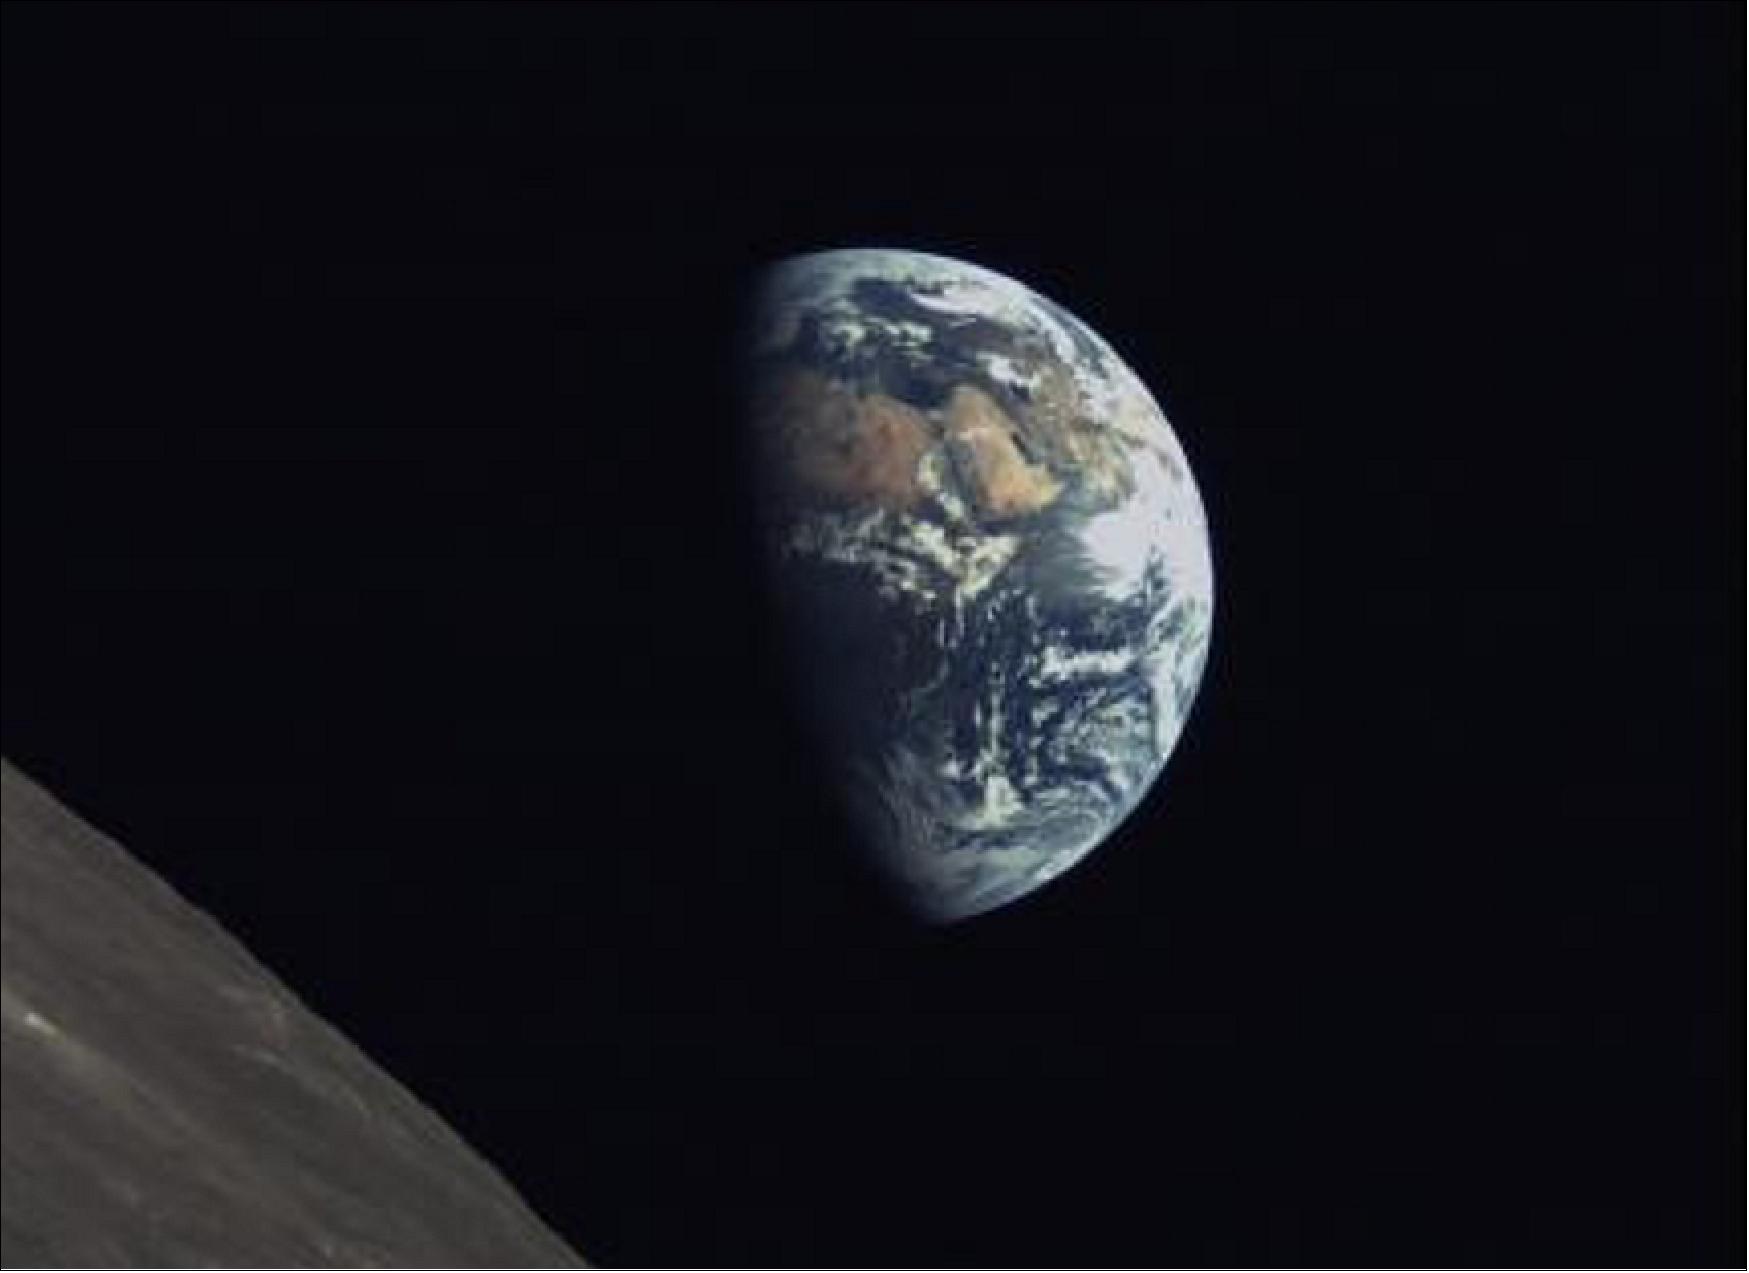 Figure 55: The Earth and Moon imaged on June 8 by the KACST-developed camera on China's Longjiang-2 microsatellite. The image shows Saudi Arabia on the distant Earth, as well as the northern hemisphere of the lunar far side, near the Petropavlovskiy crater (image credit: CNSA/CLEP/KACST)